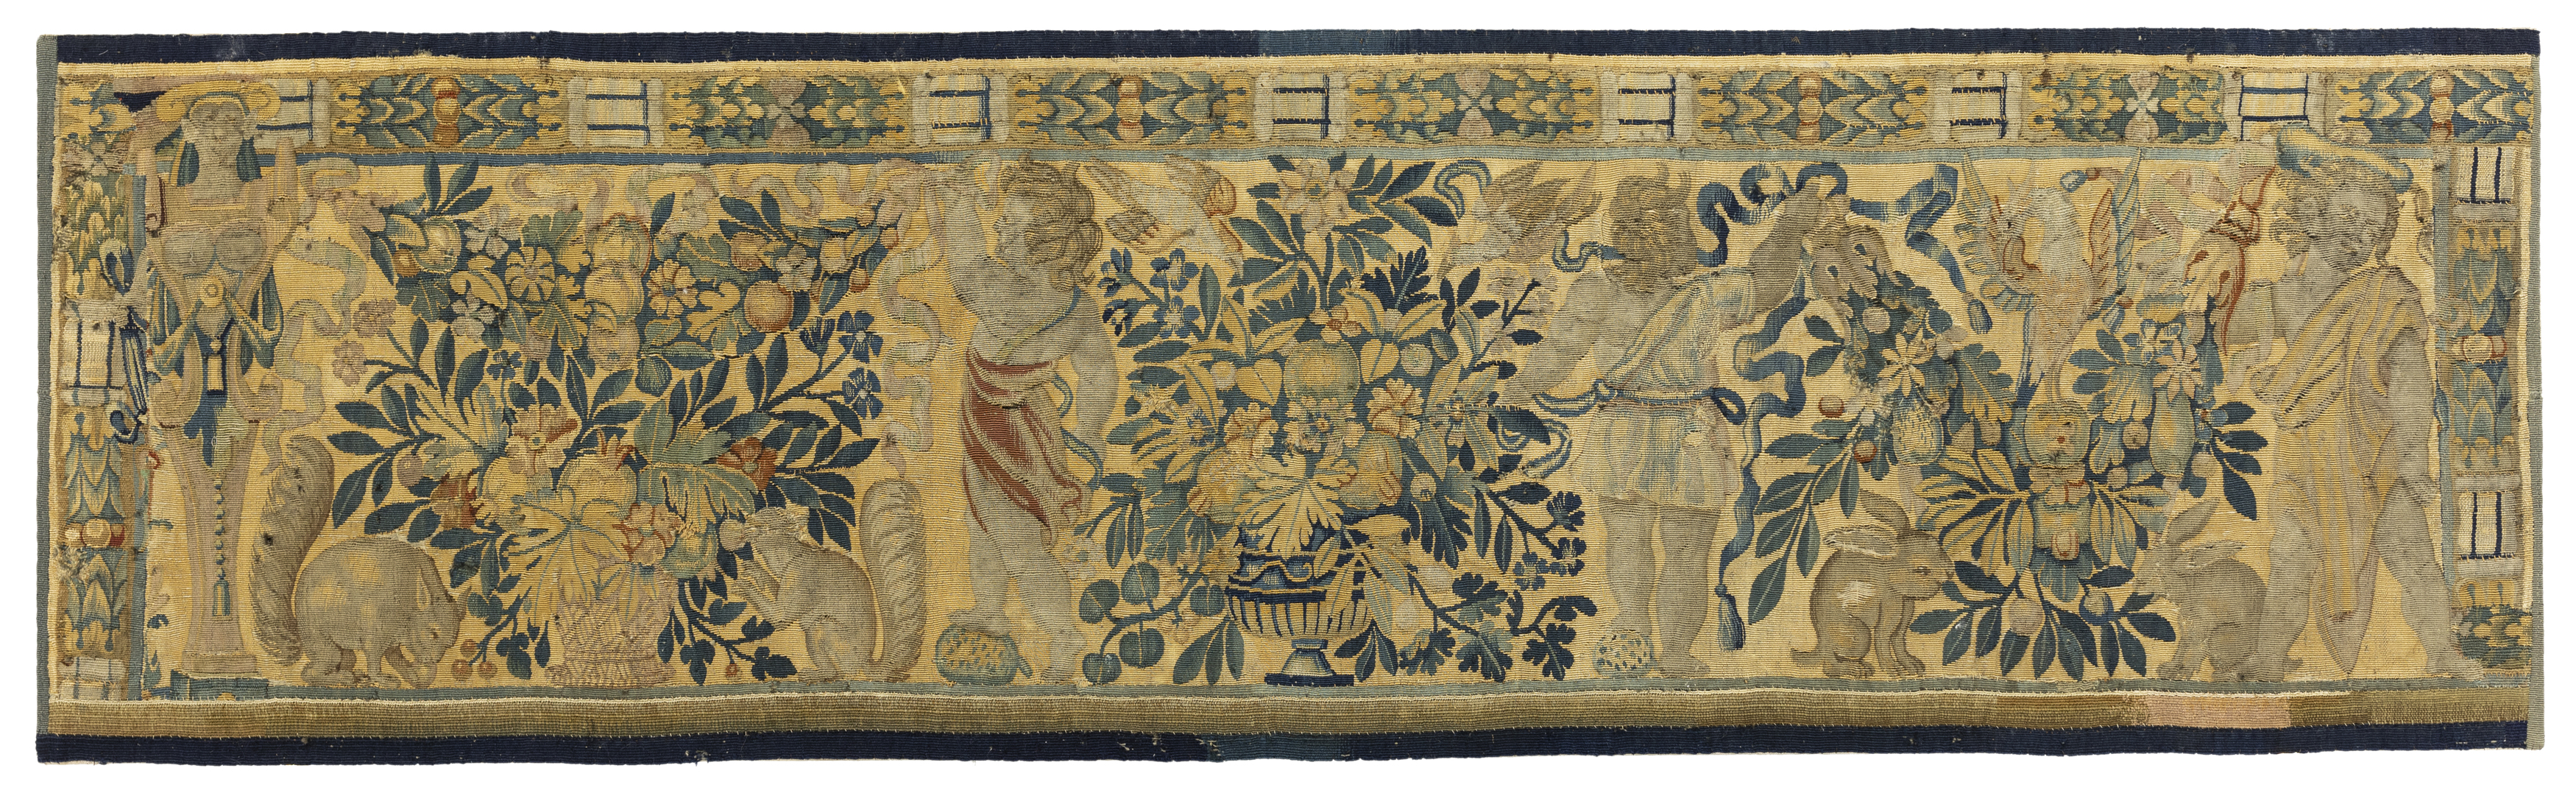 Two Flemish tapestry border fragments, Possibly Brussels, 17th century,  Woven wools and silks, e... - Image 3 of 3